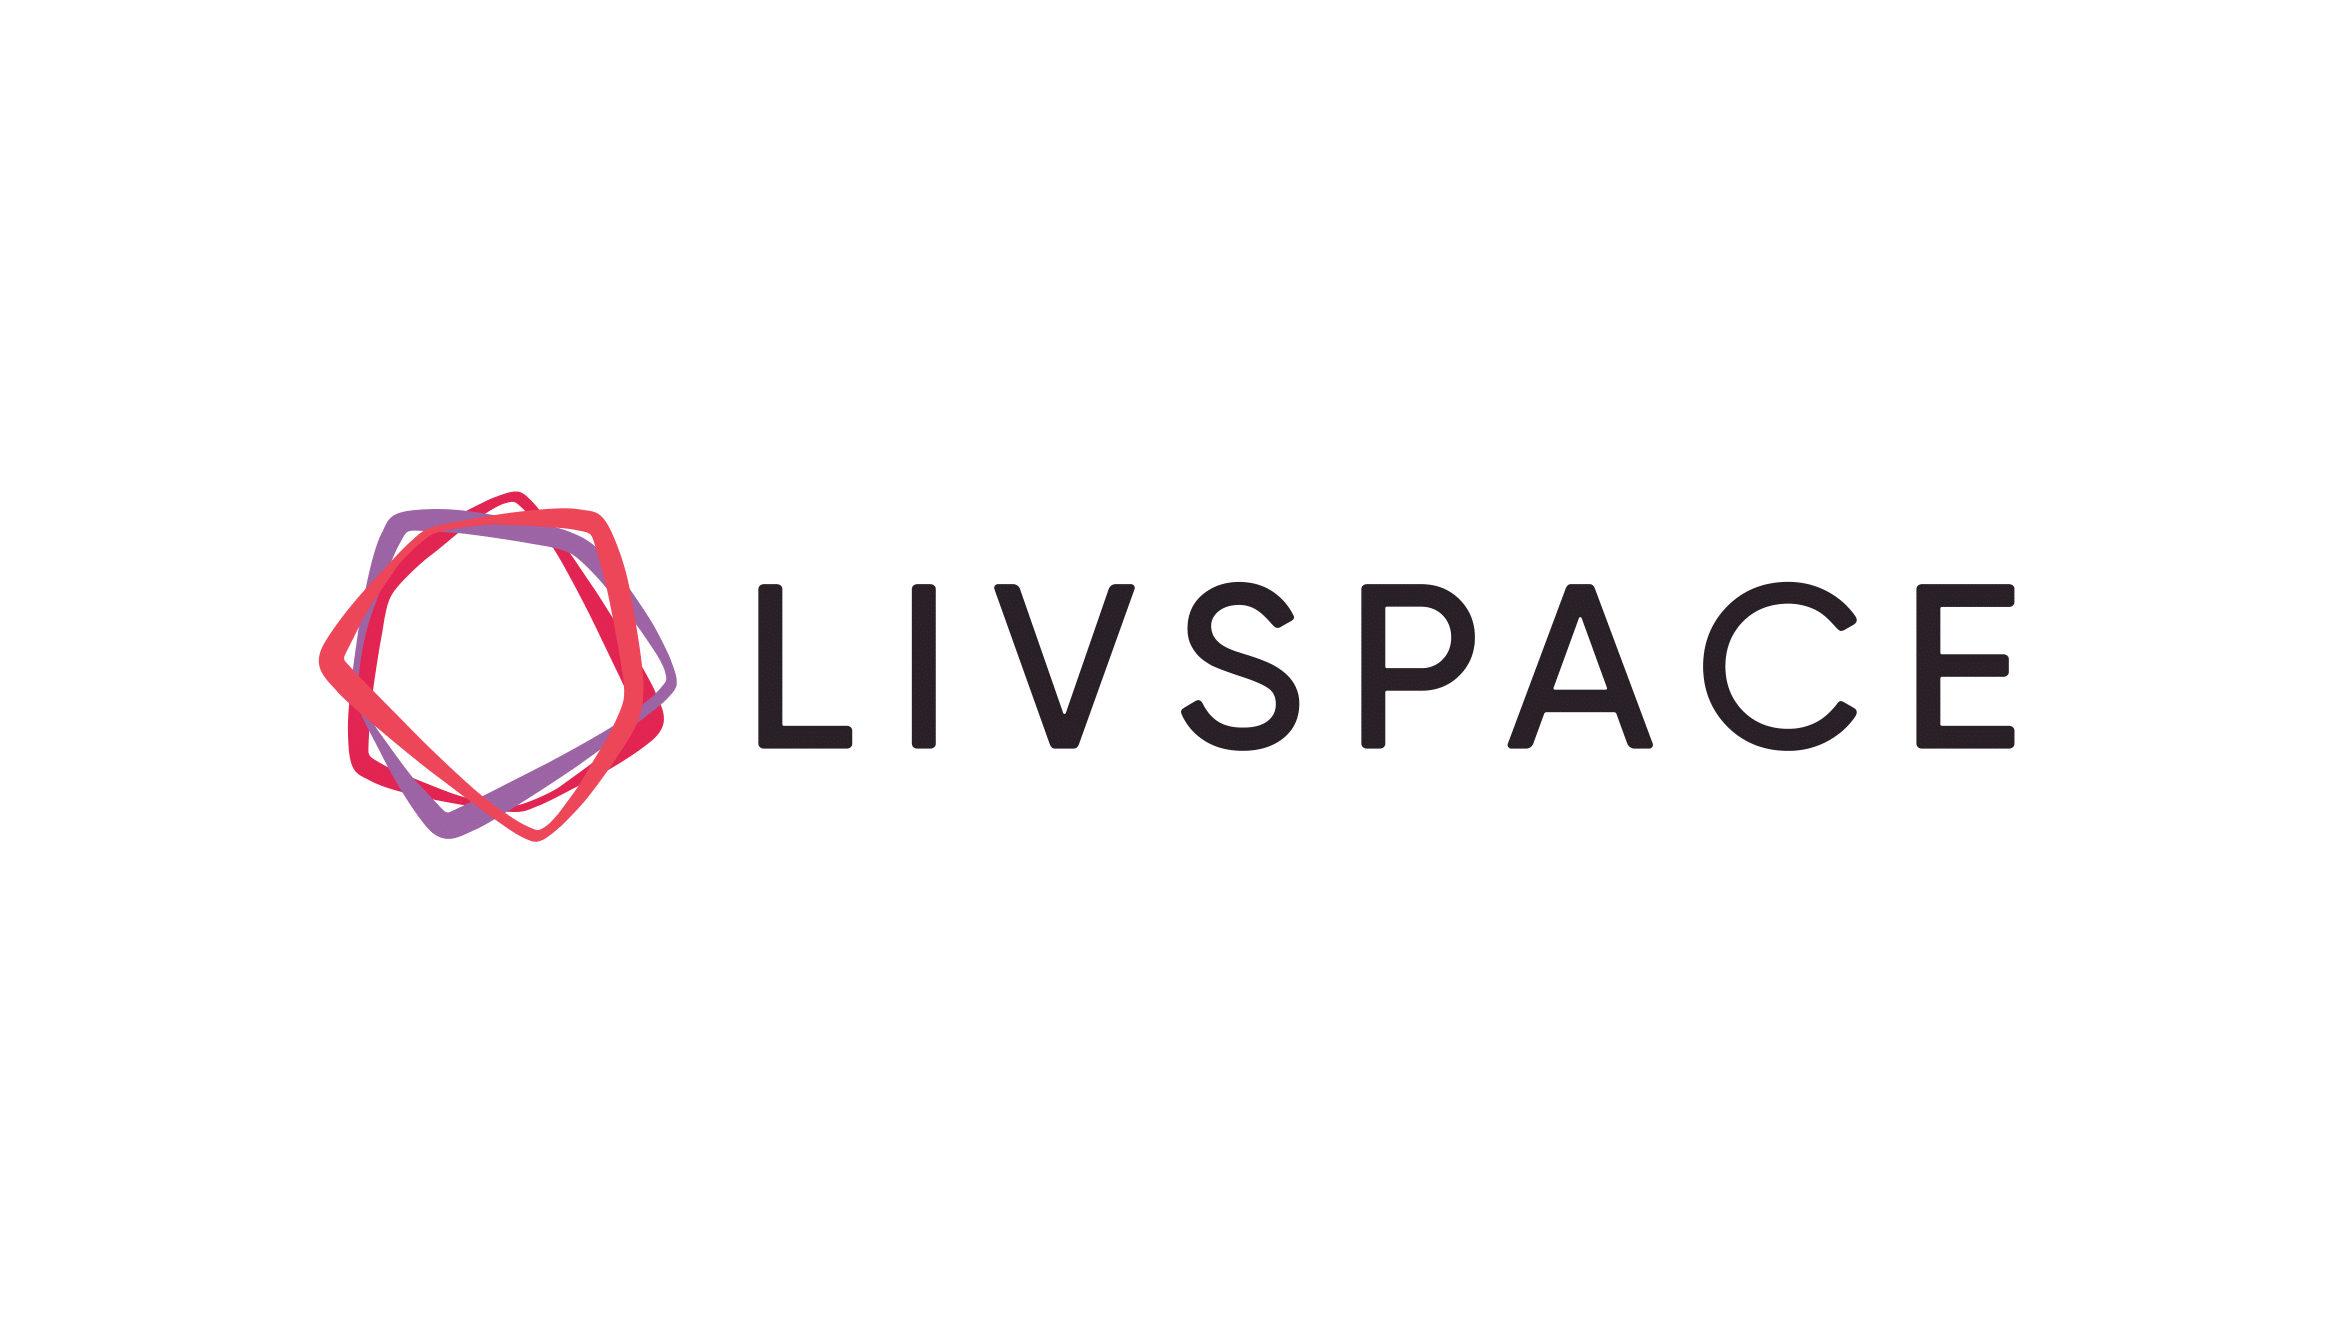 Essence appointed integrated media agency for Livspace